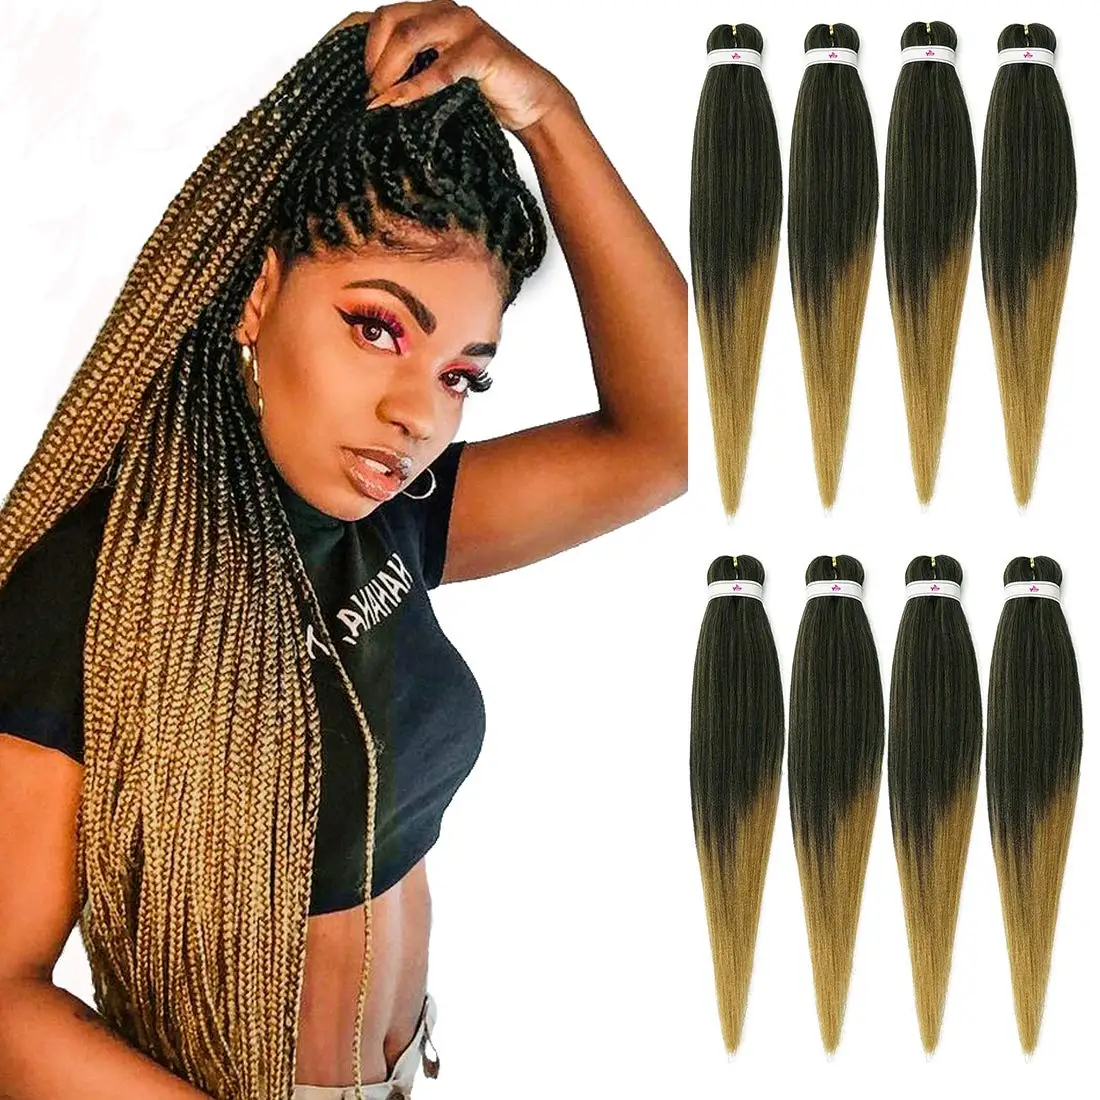 

Synthetic Easy Braids Hair Super Jumbo Tz Braids Hair Yaki X Pression Woman Ombre Jumbo Braiding Hair Extensions, Picture